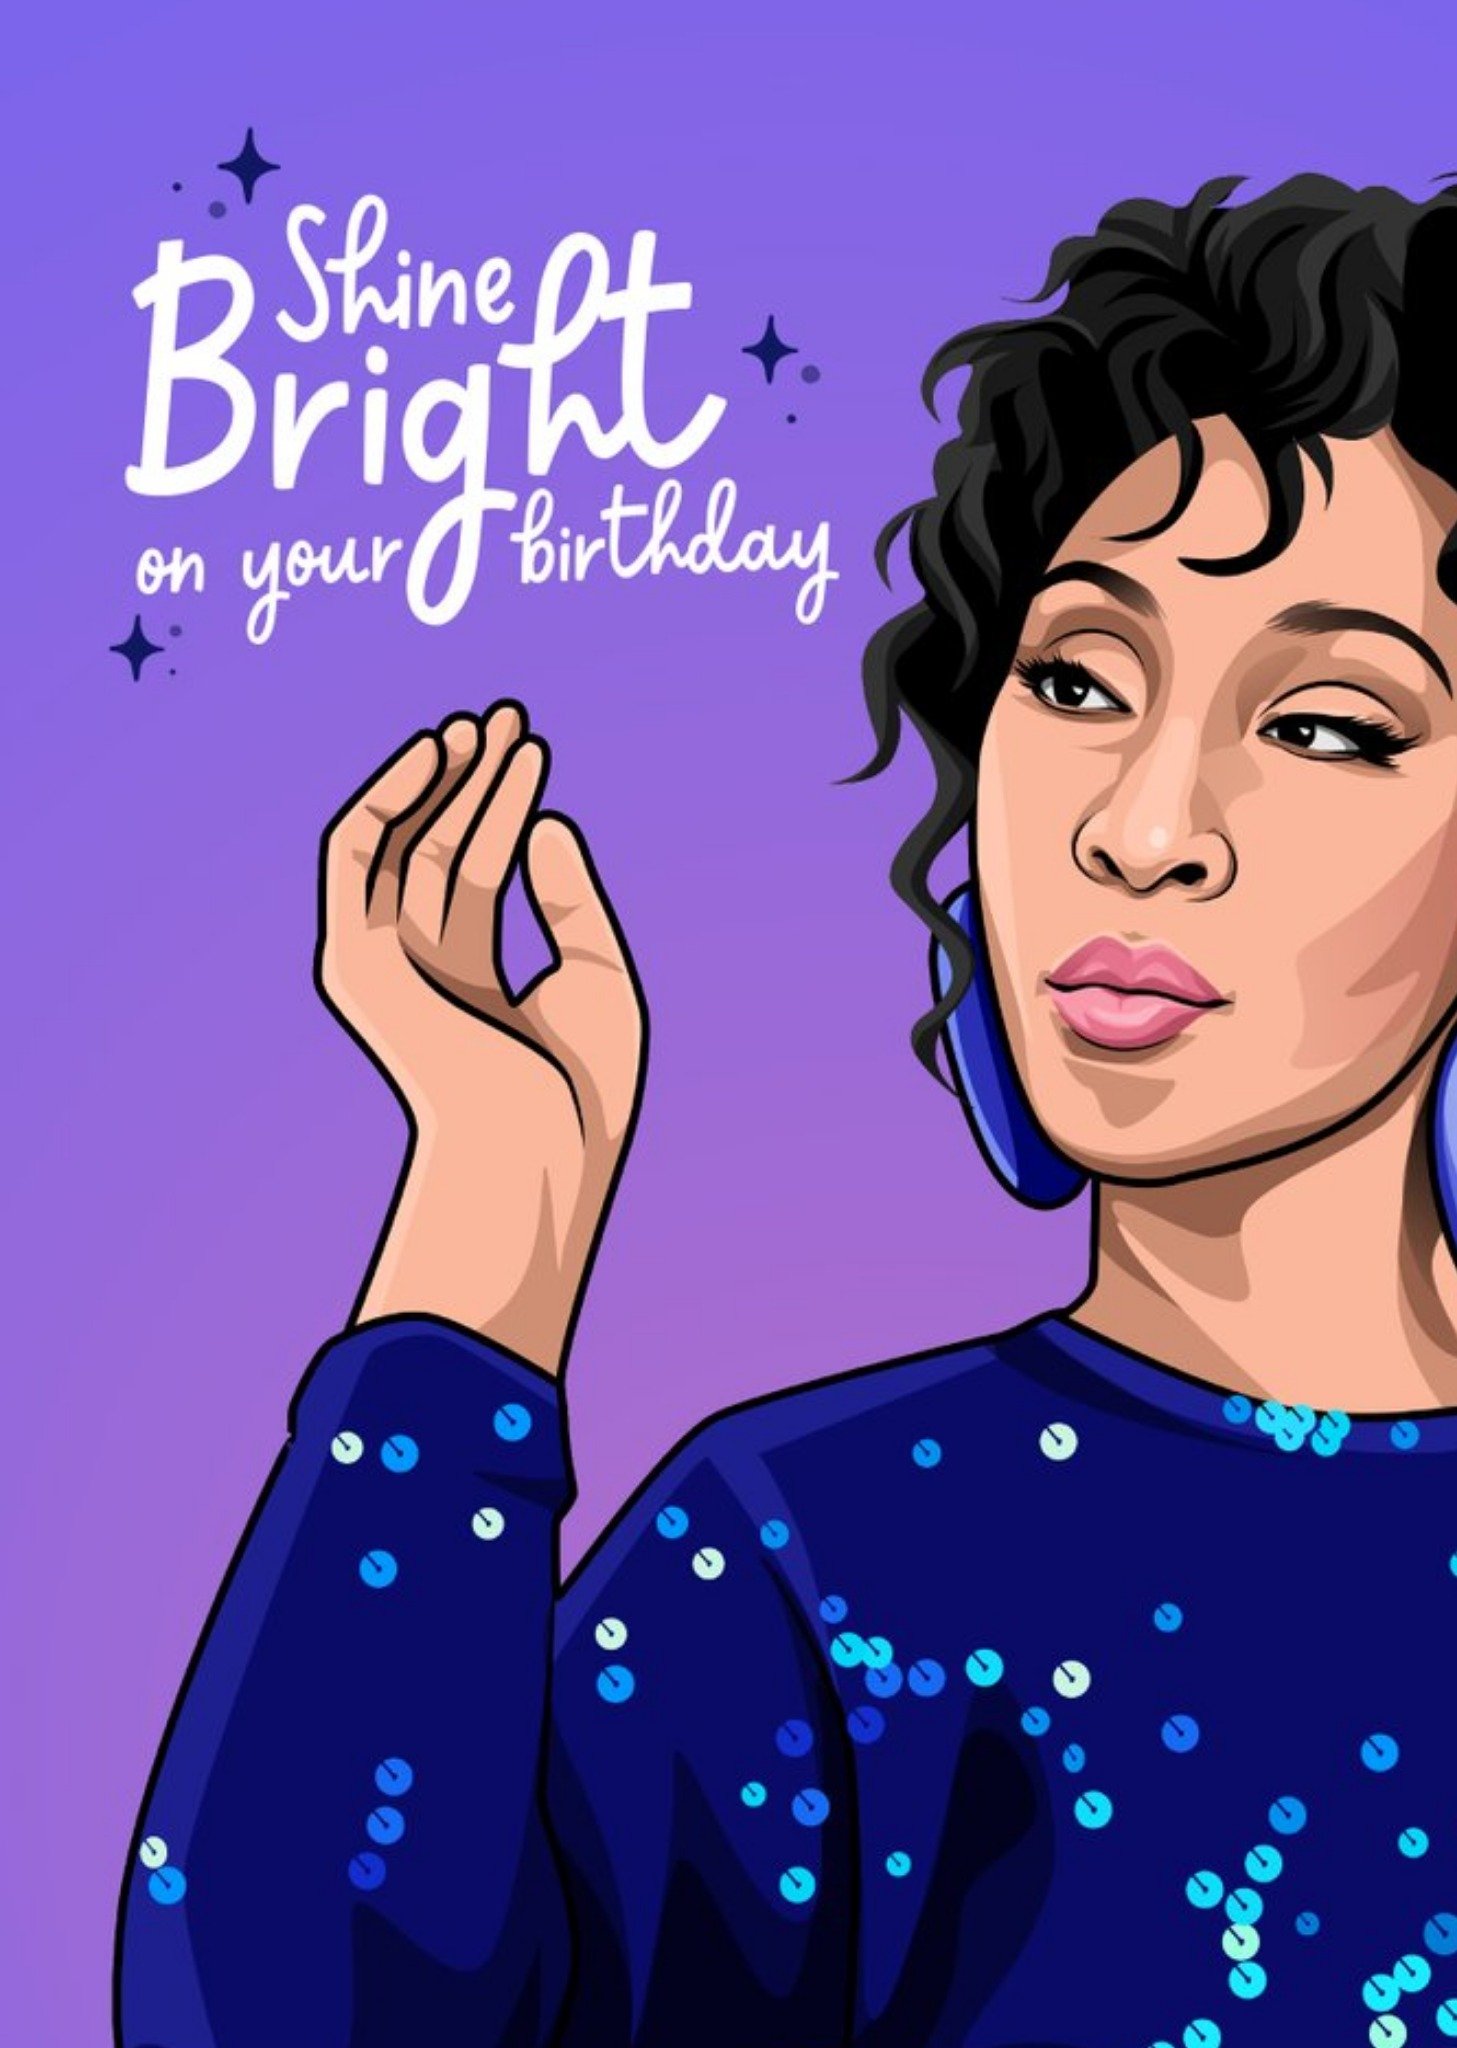 All Things Banter Illustration Of Singer Shine Bright Birthday Card, Large